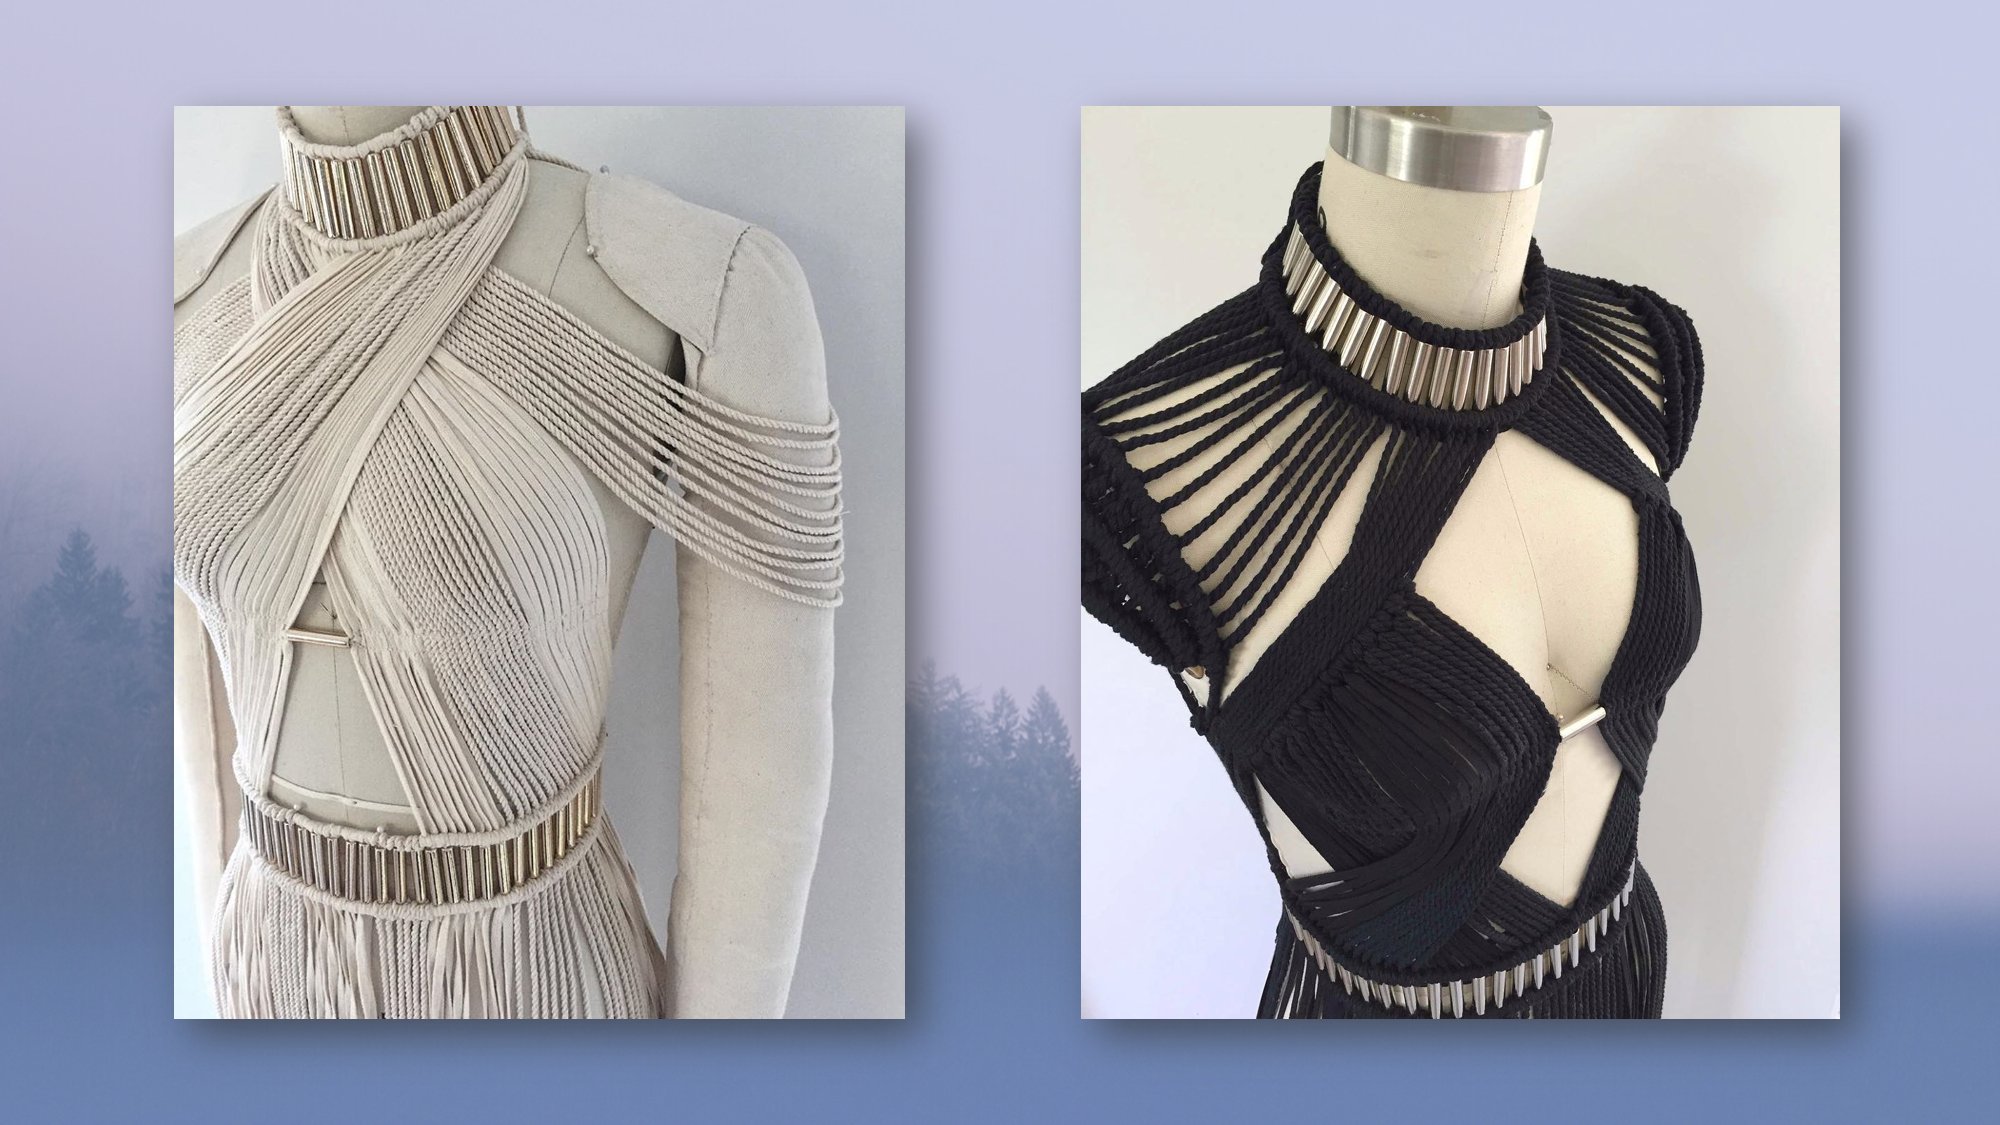 Denisse M Vera on X: Yennefer's rope dress inspired by our